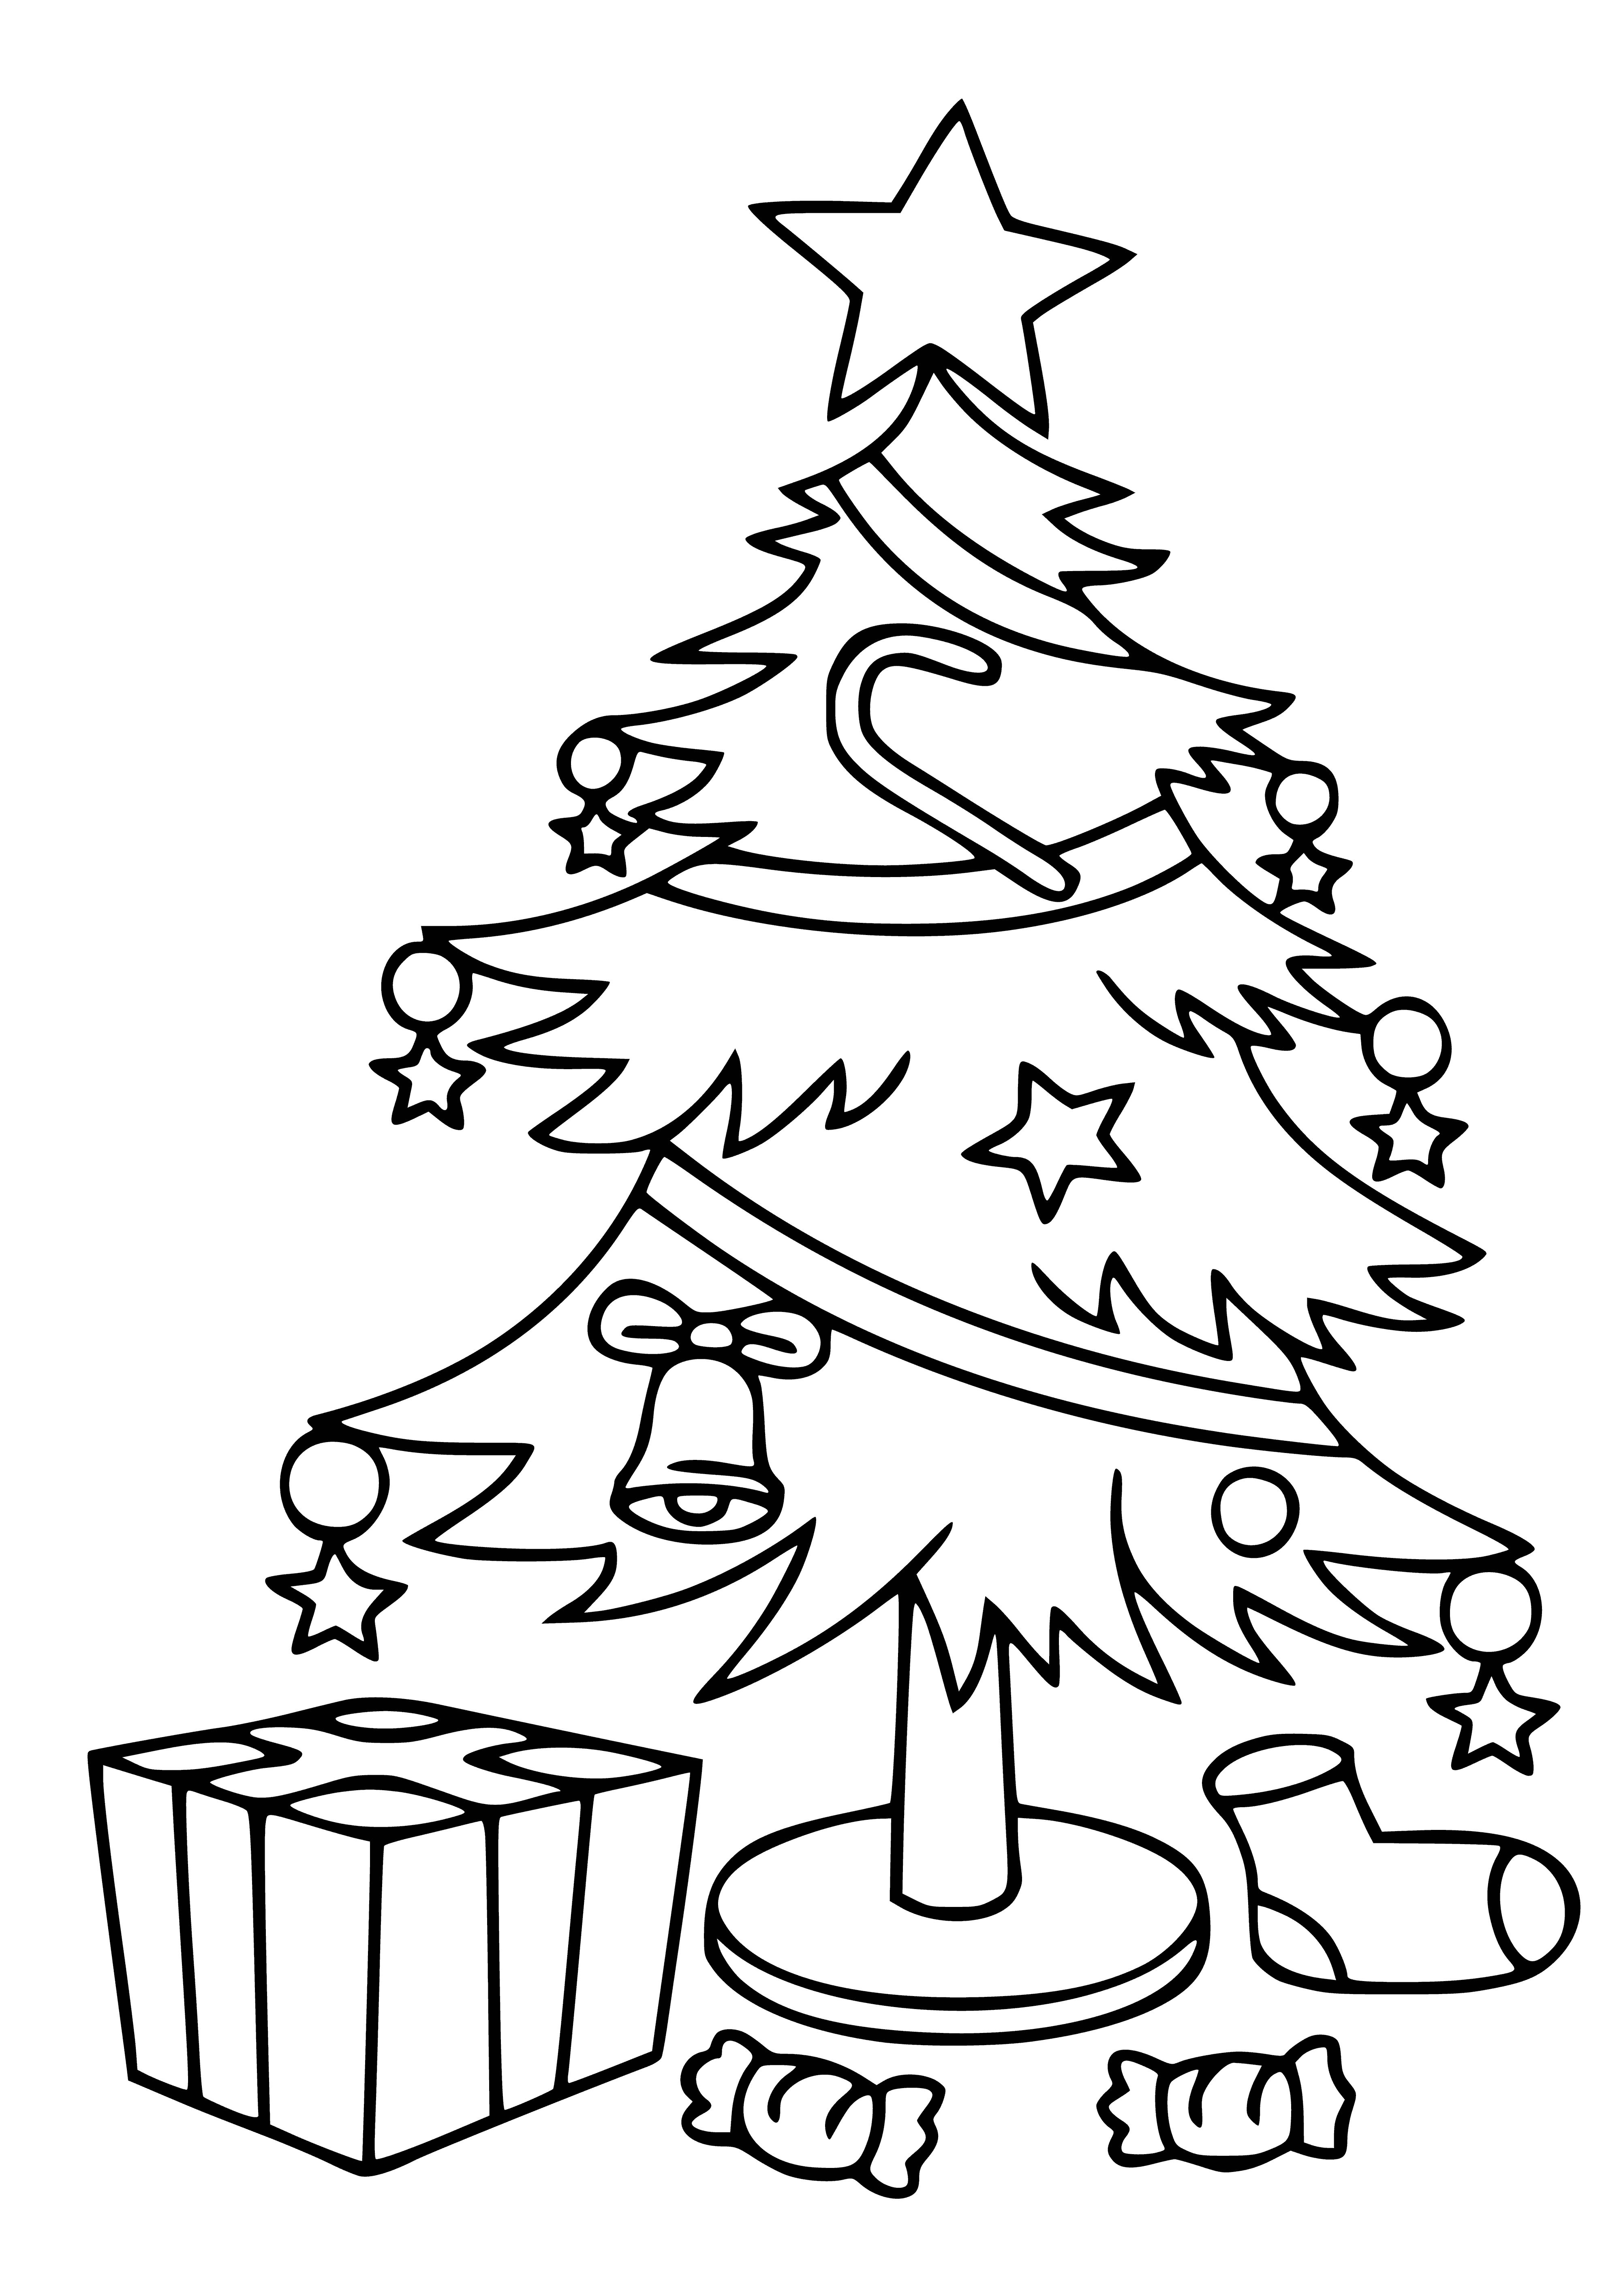 coloring page: Presents of green, red, and gold under the tree with ribbons and bows for everyone.